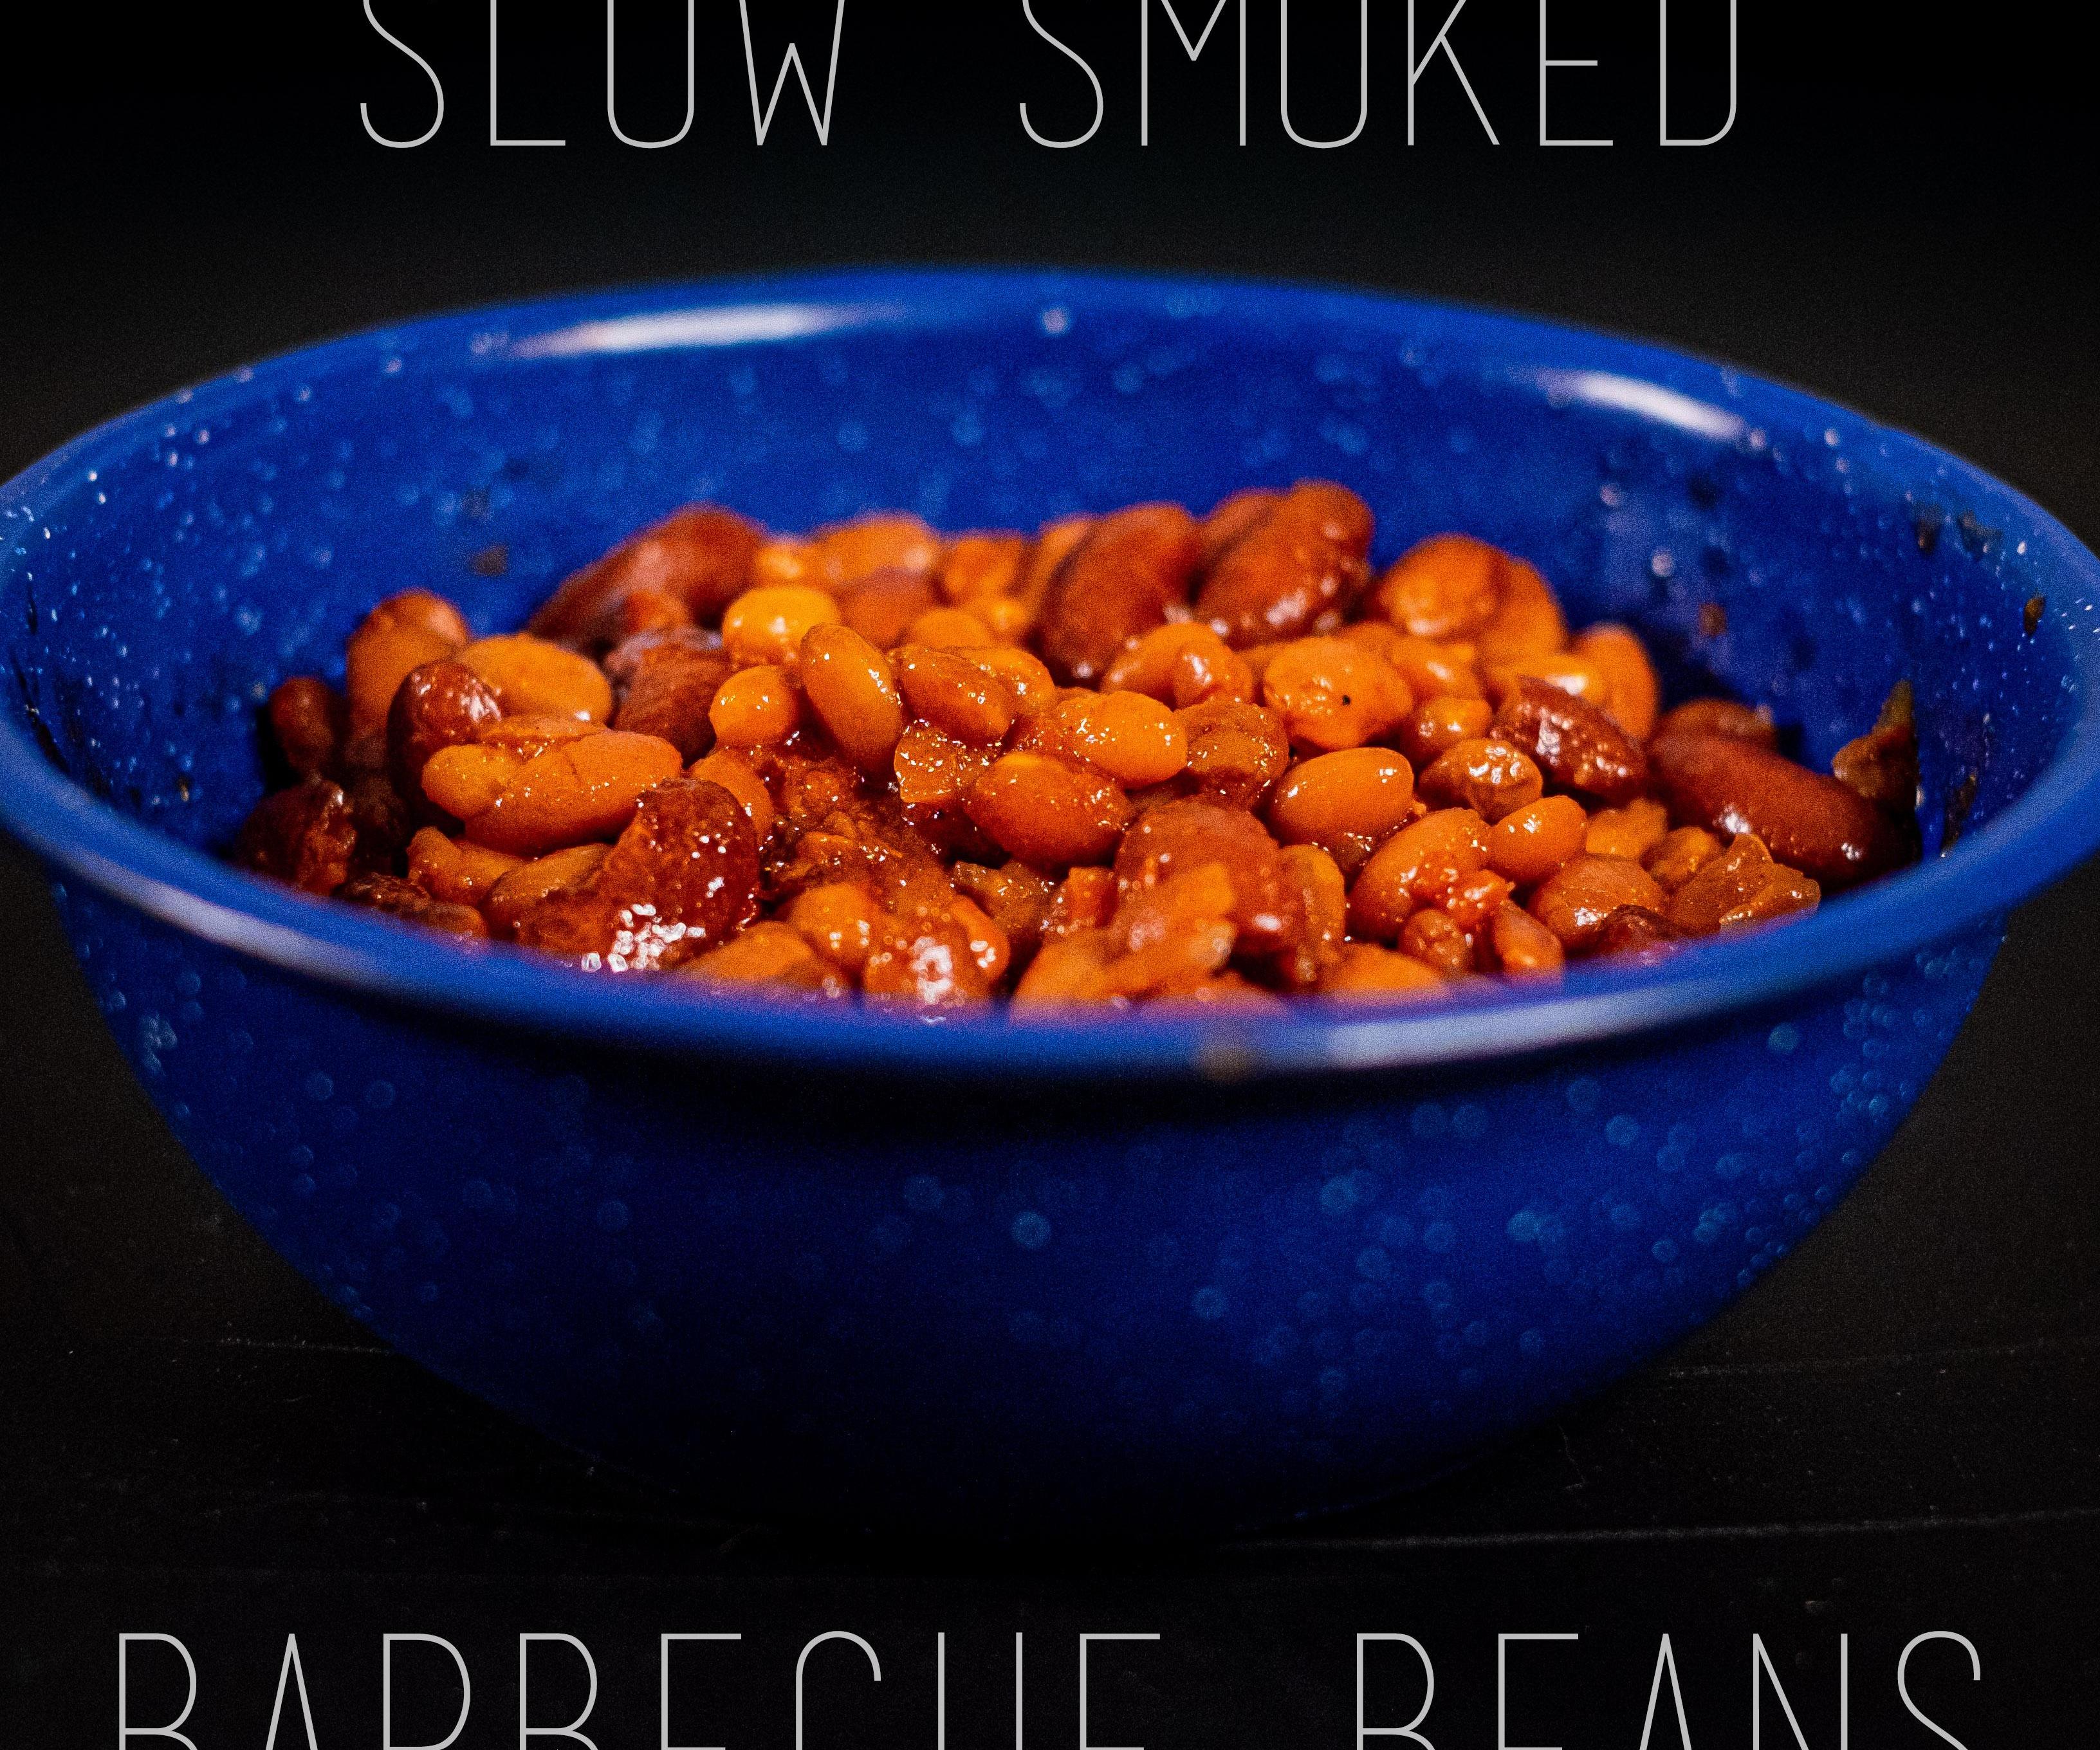 Slow Smoked Barbecue Beans